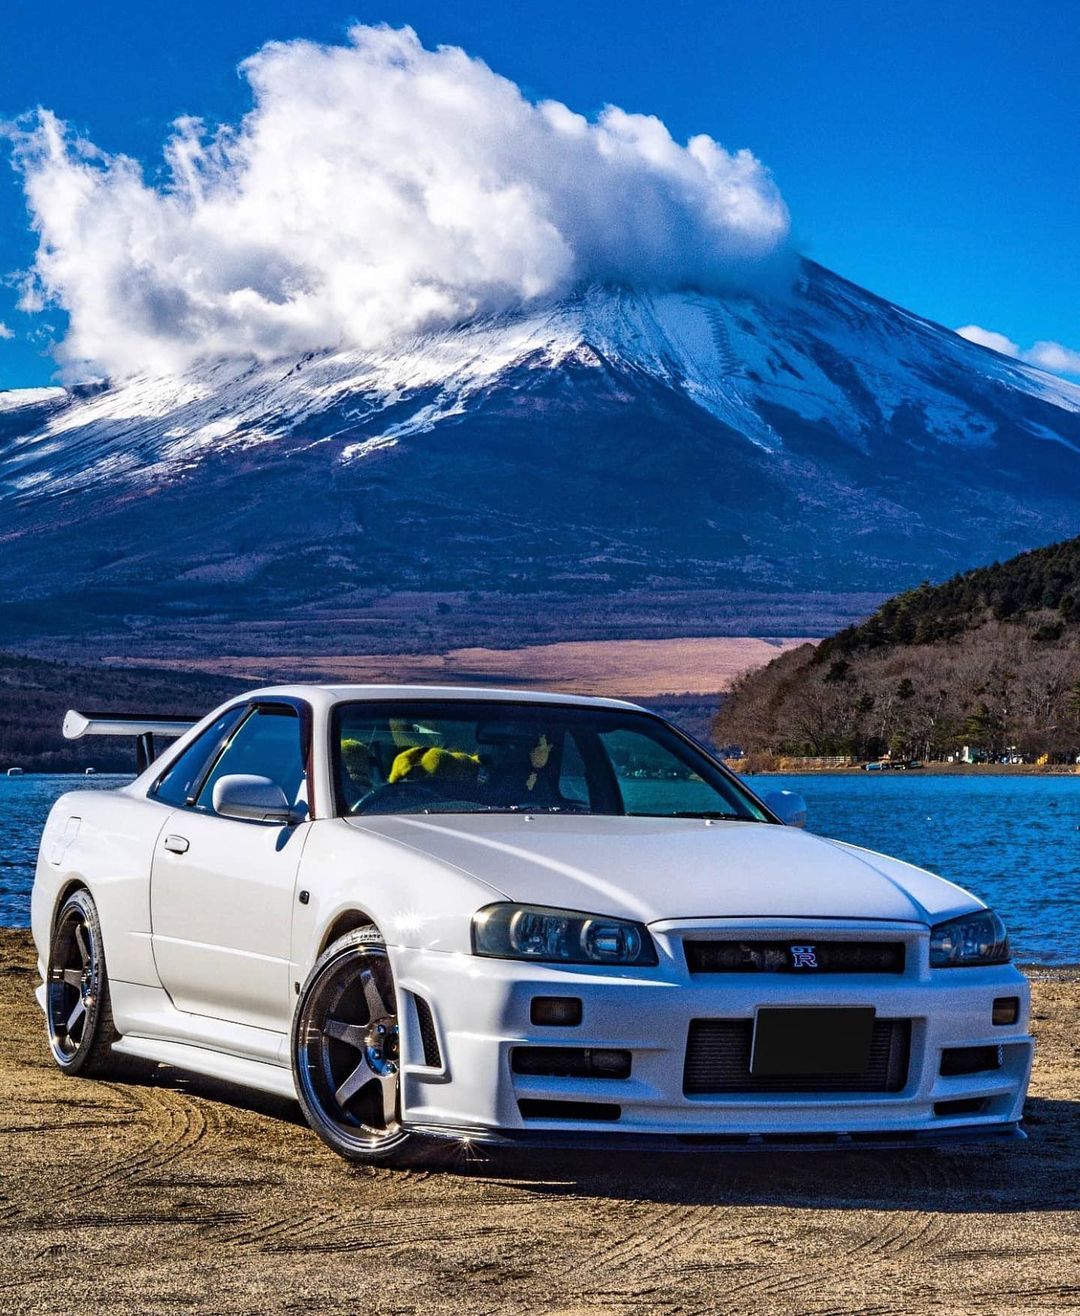 A white R34 skyline in front of a mountain - Nissan Skyline